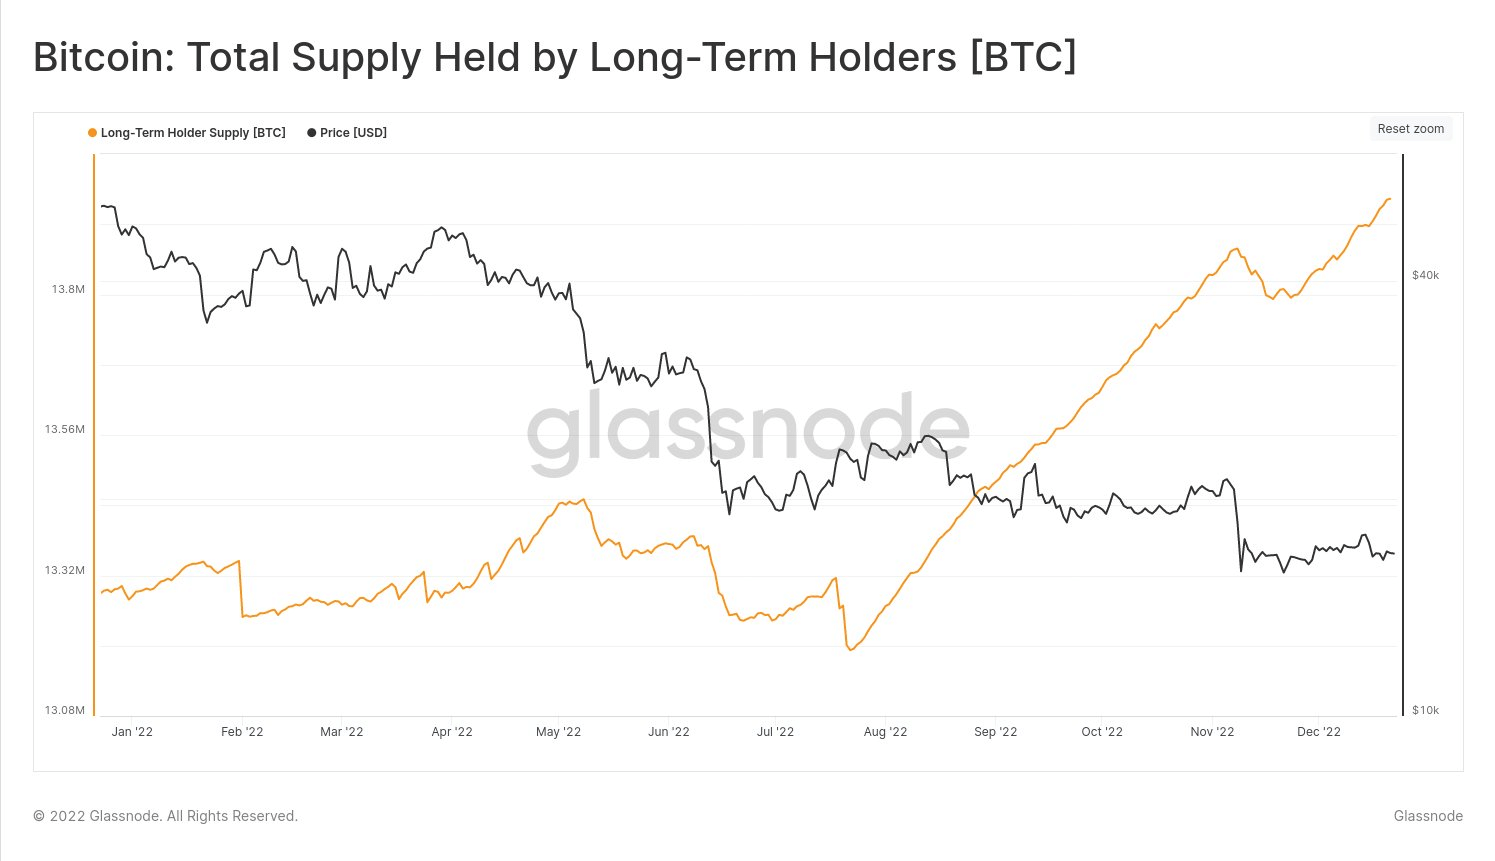 Total supply of Bitcoin held by long-term holders. Source: Glassnode